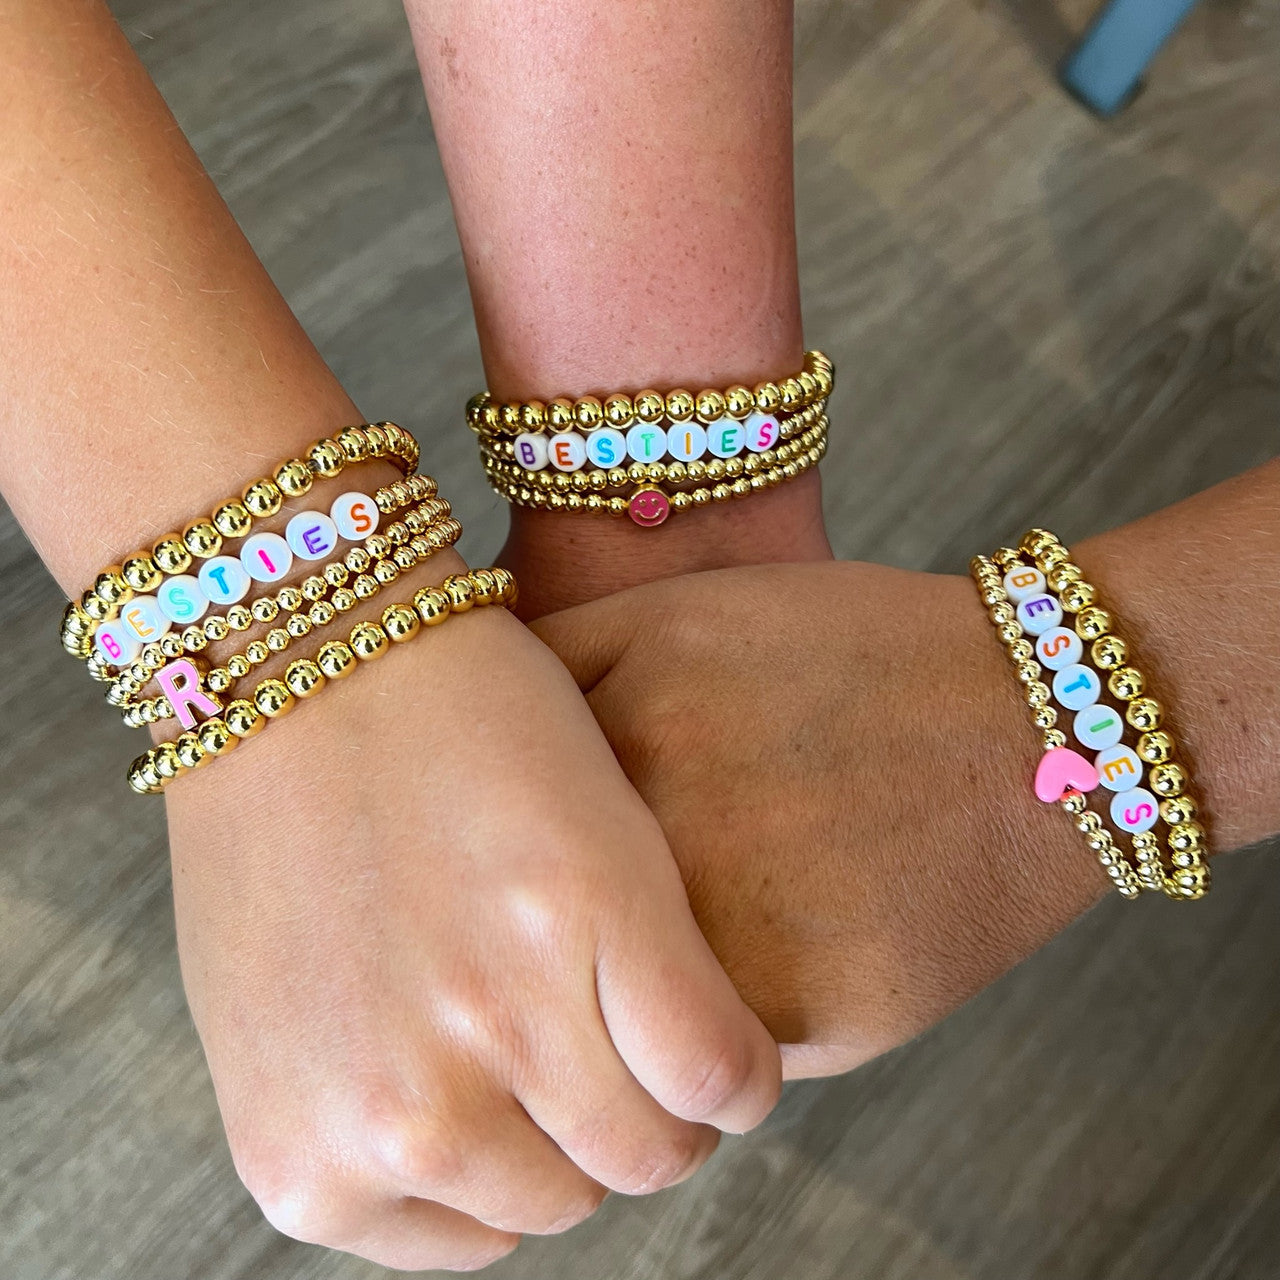 Gemio Friendship Bracelets These colorful bracelets can be customized  The  10 Hottest Tech Toys For 2015  POPSUGAR Family Photo 10